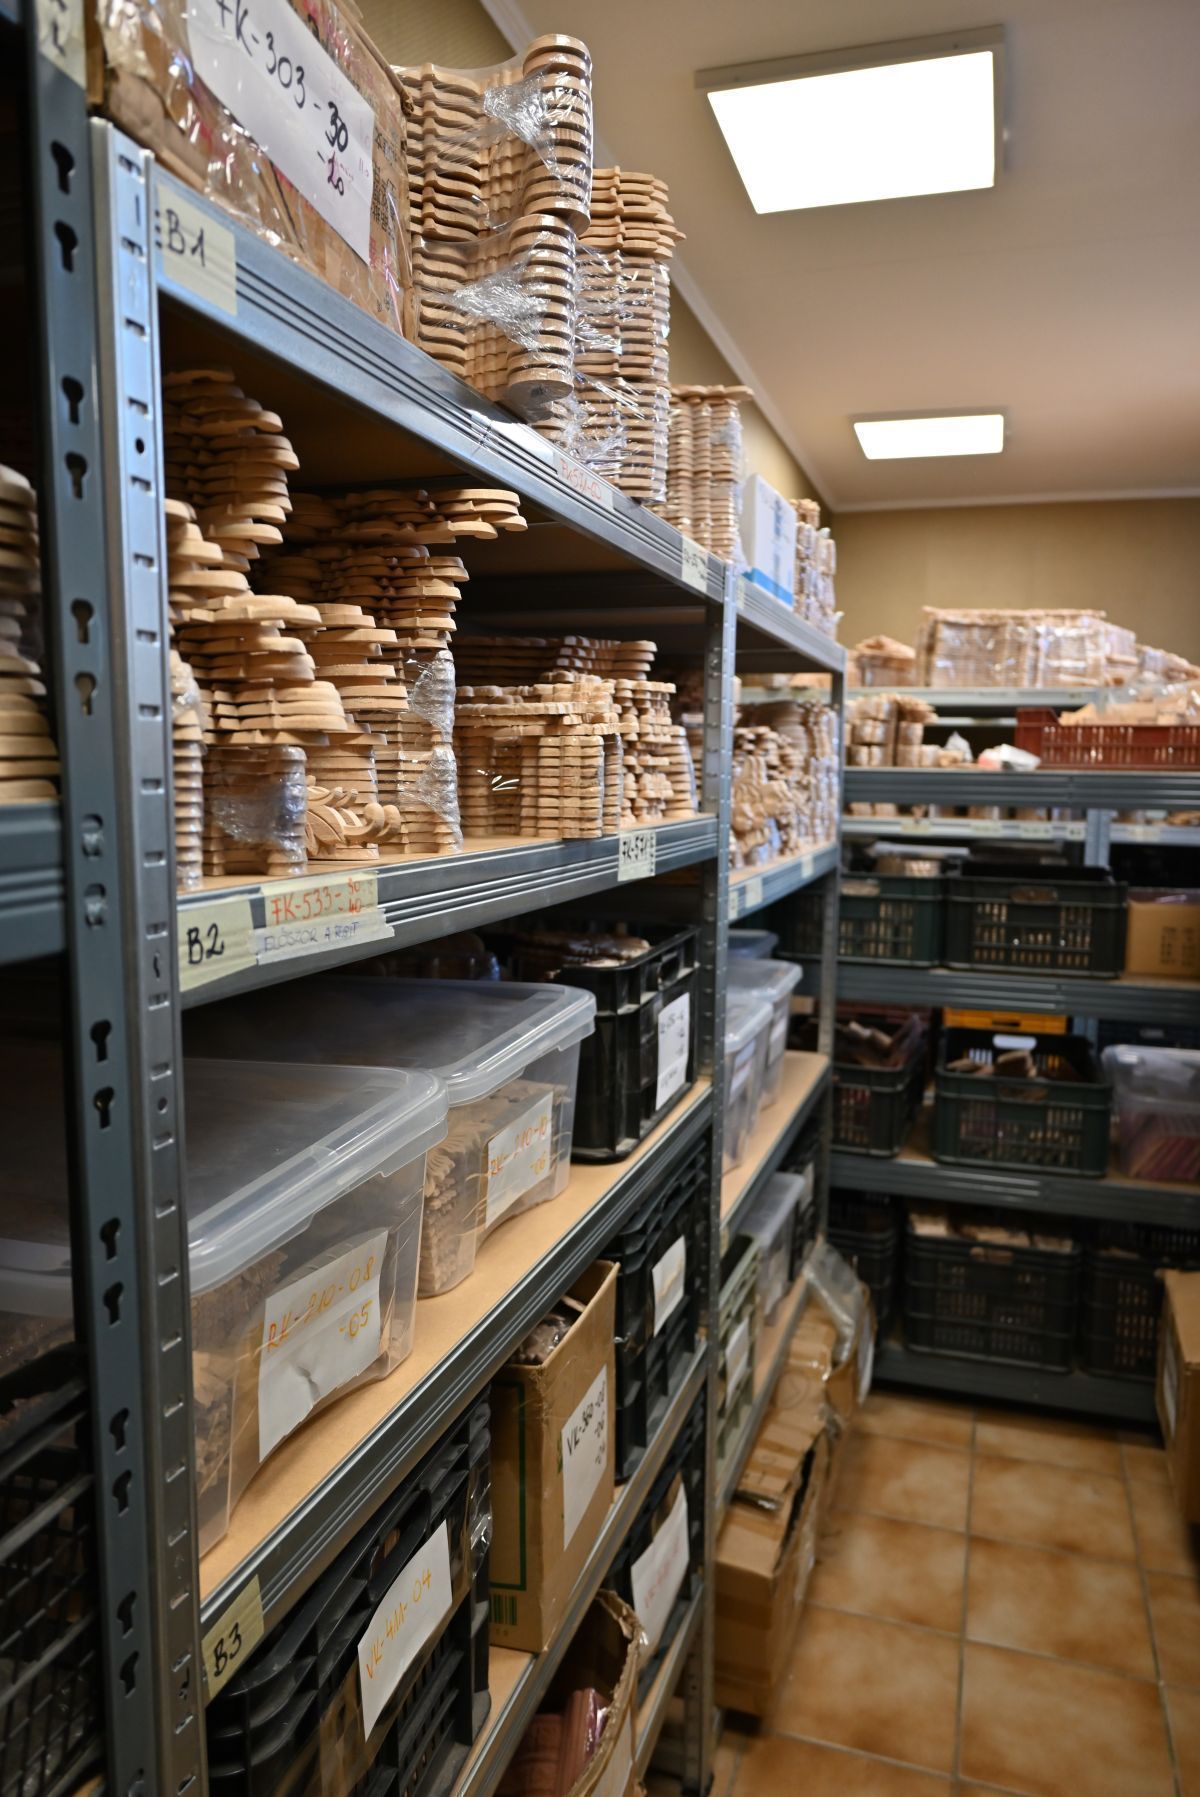 Hundreds of different ornaments can be ordered from the woodcarving shop's stock. Fast and safe delivery.